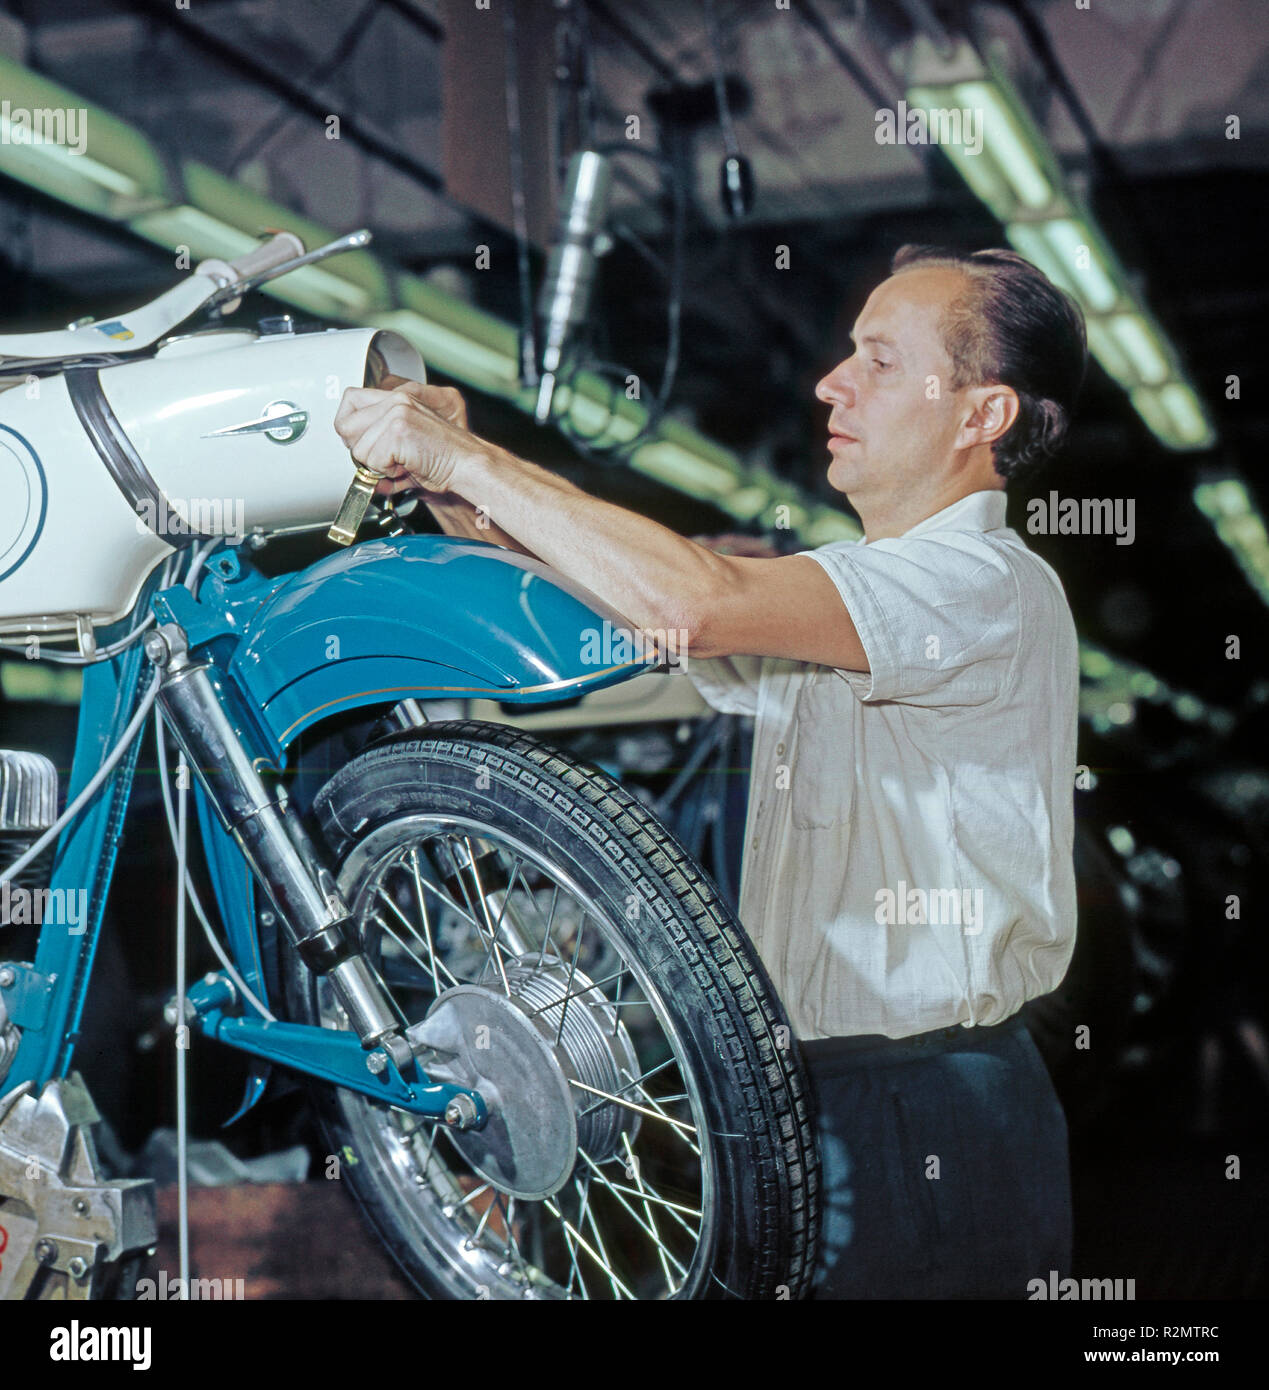 Worker assembling an MZ machine in the production hall of VEB Motorbike factory Zschopau Stock Photo